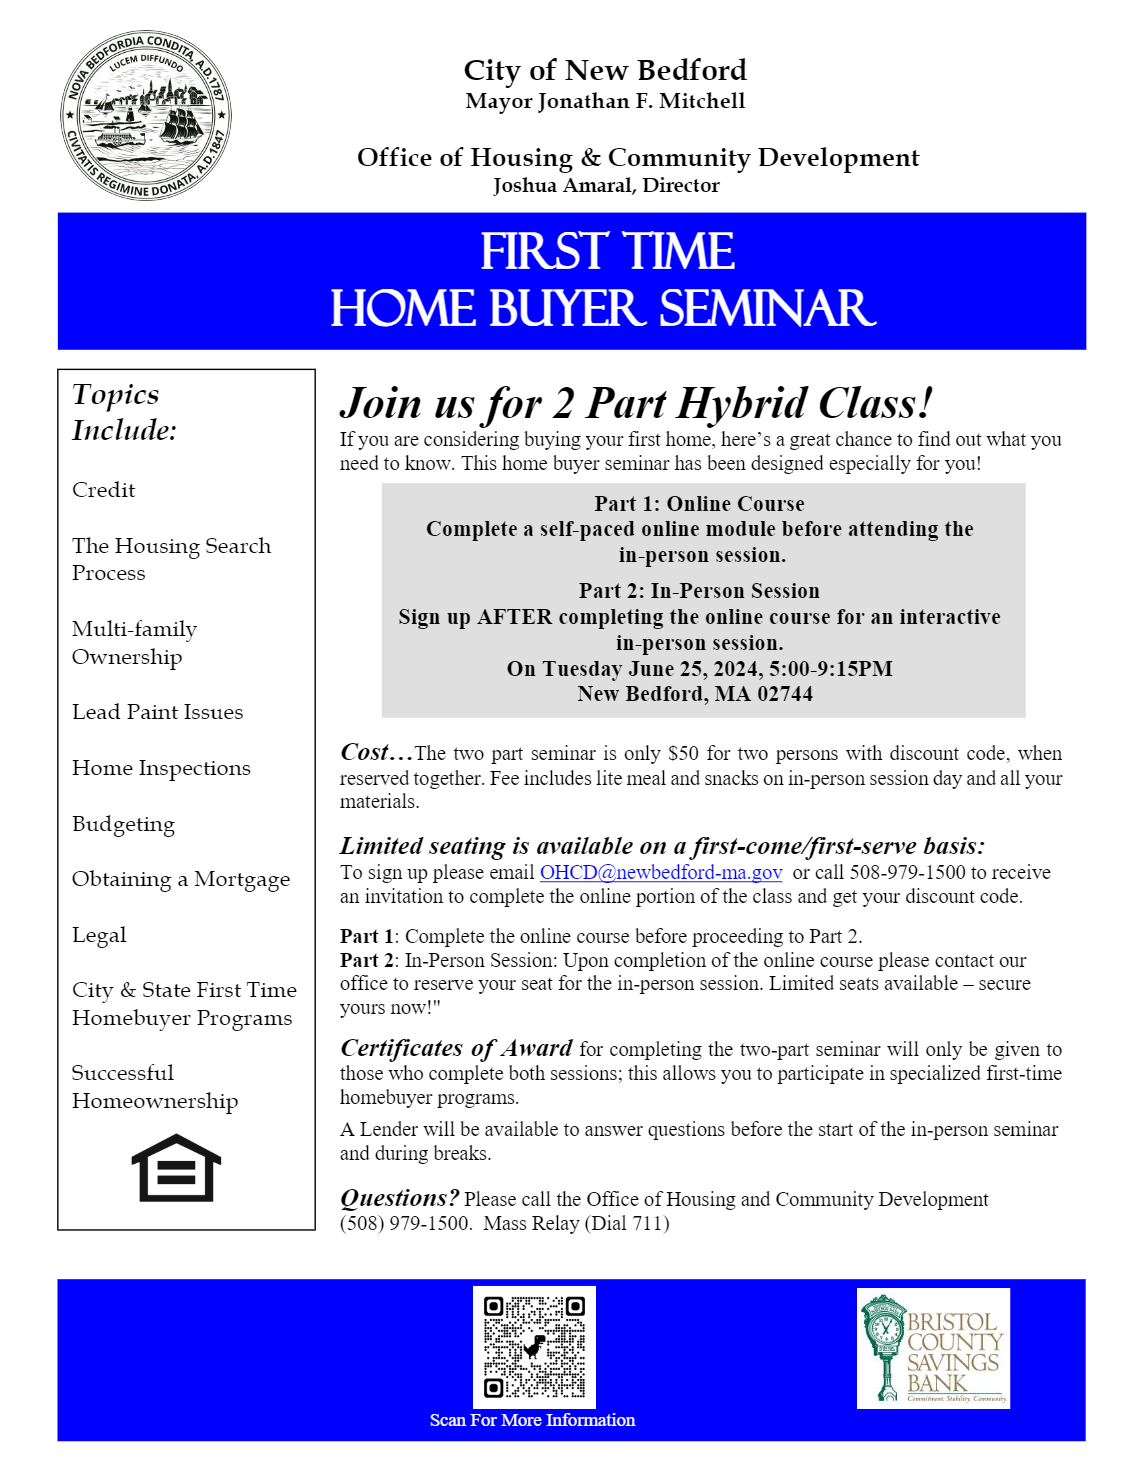 City of New Bedford
Mayor Jonathan F. Mitchell

Office of Housing & Community Development
Joshua Amaral, Director

Join us for 2 Part Hybrid Class!
If you are considering buying your first home, here’s a great chance to find out what you need to know. This home buyer seminar has been designed especially for you!

Cost…The two part seminar is only $50 for two persons with discount code, when reserved together. Fee includes lite meal and snacks on in-person session day and all your materials.
Limited seating is available on a first-come/first-serve basis:
To sign up please email OHCD@newbedford-ma.gov or call 508-979-1500 to receive an invitation to complete the online portion of the class and get your discount code.
Part 1: Complete the online course before proceeding to Part 2.
Part 2: In-Person Session: Upon completion of the online course please contact our office to reserve your seat for the in-person session. Limited seats available – secure yours now!"
Certificates of Award for completing the two-part seminar will only be given to those who complete both sessions; this allows you to participate in specialized first-time homebuyer programs.
A Lender will be available to answer questions before the start of the in-person seminar and during breaks.
Questions? Please call the Office of Housing and Community Development
(508) 979-1500. Mass Relay (Dial 711)
